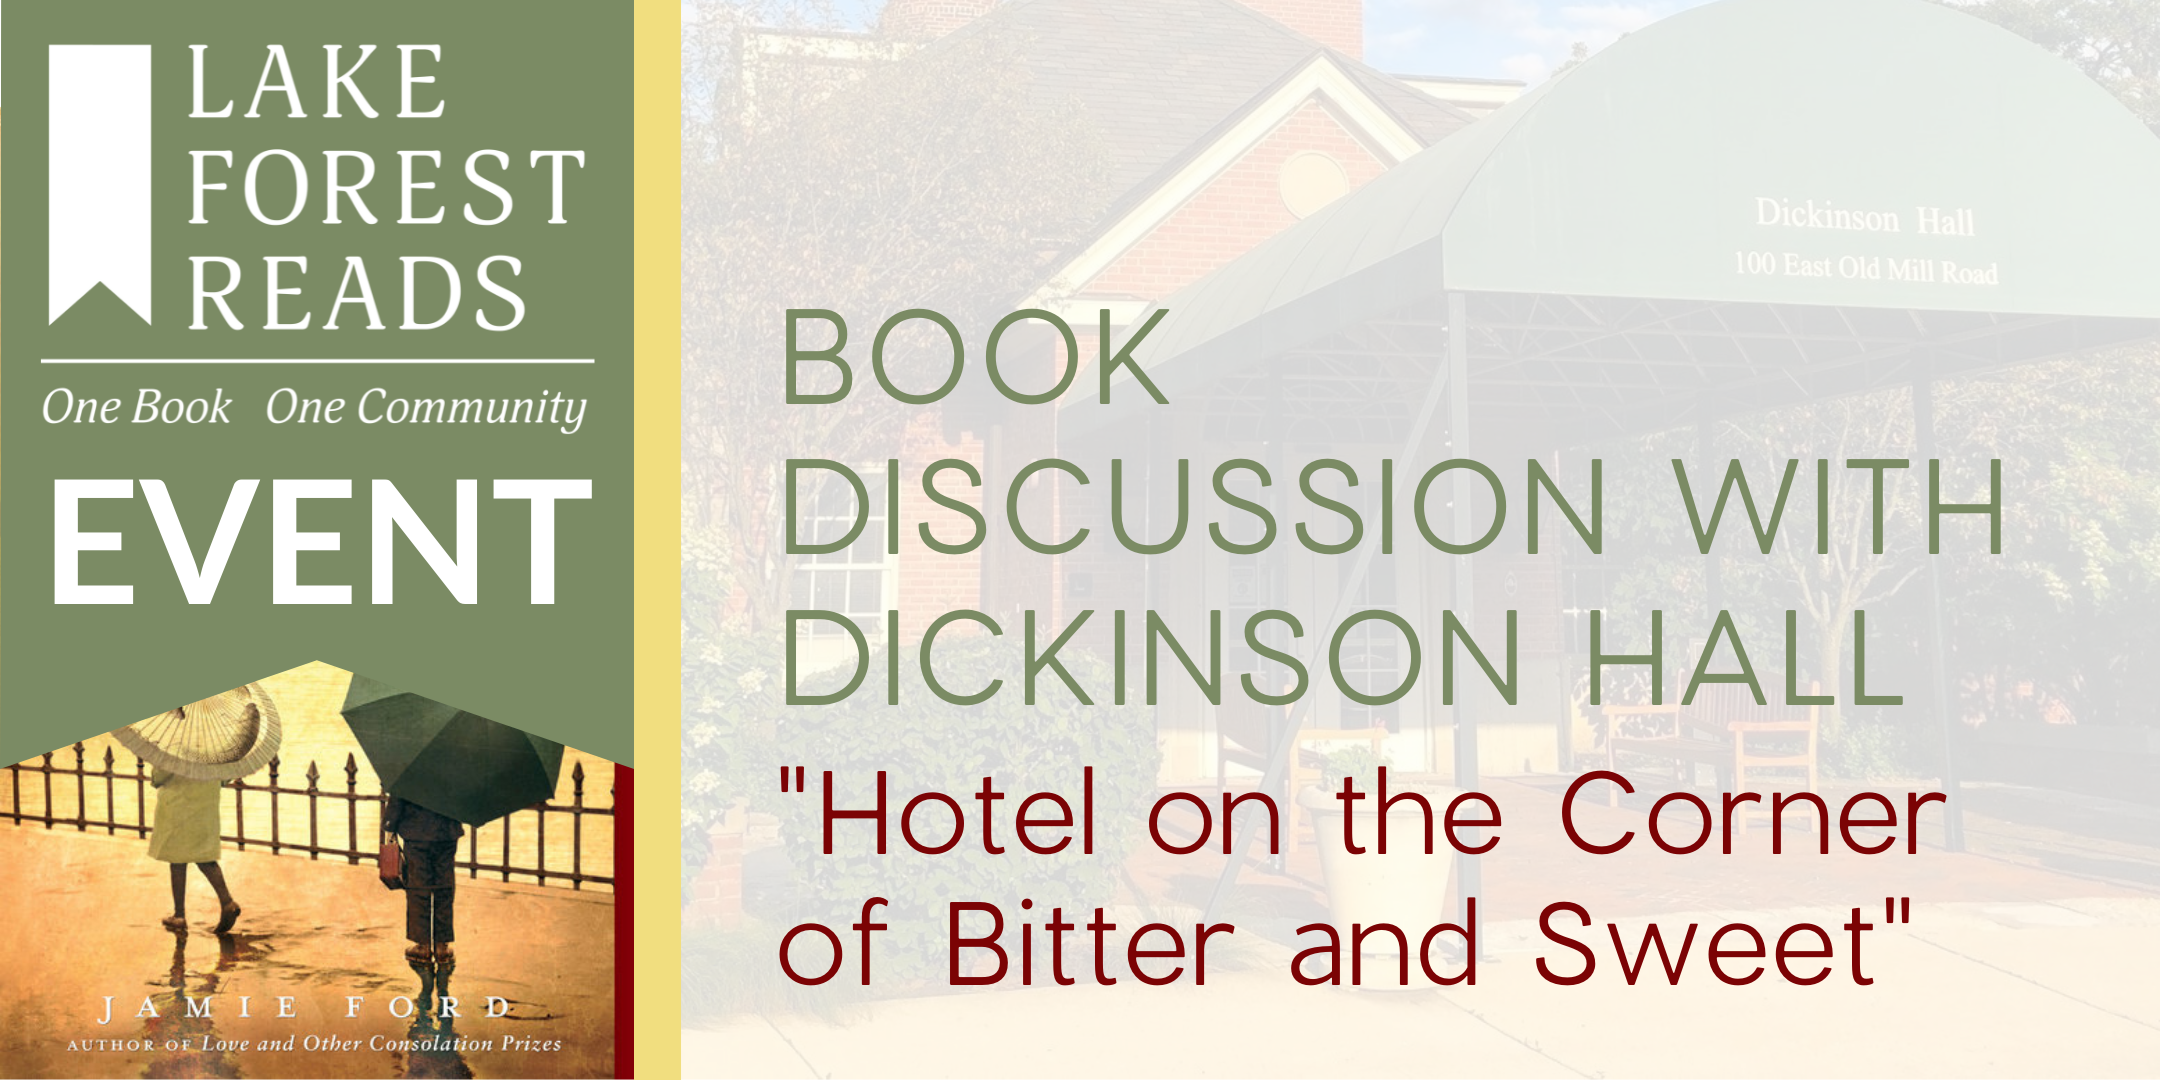 Book Discussion at Dickinson Hall on "Hotel on the Corner of Bitter and Sweet" image